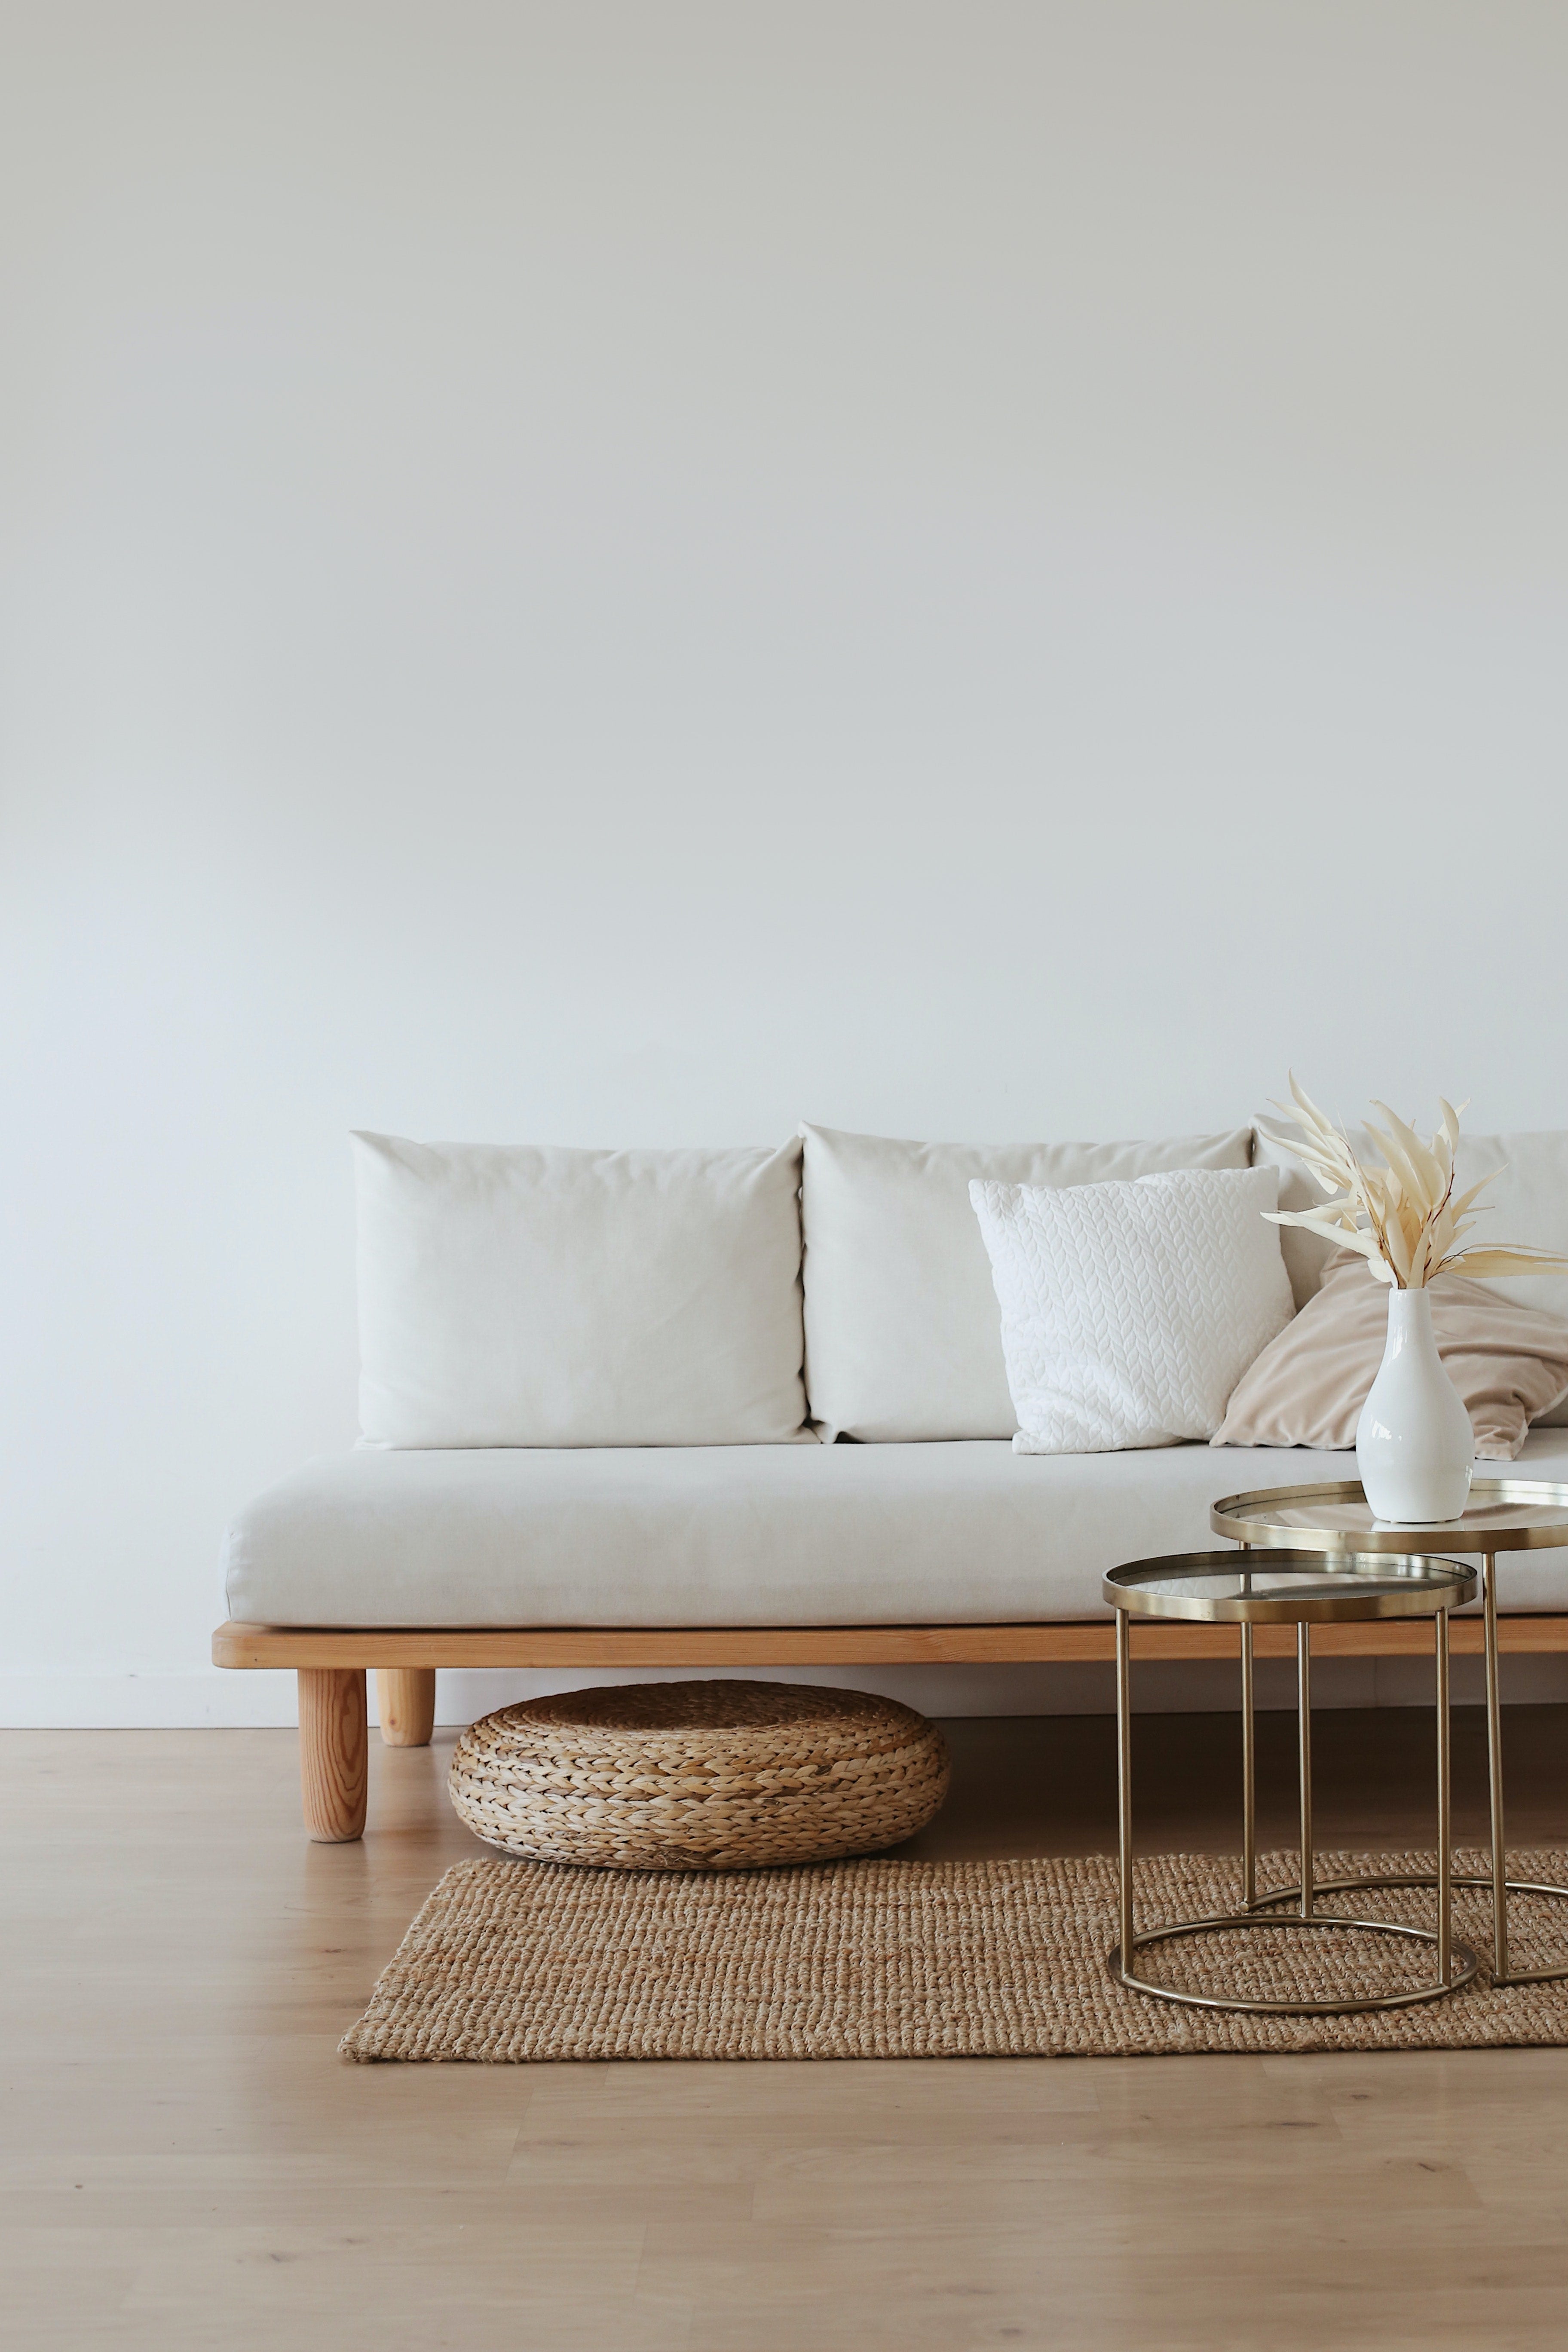  has simplicity become more popular in home decor and lifestyle?